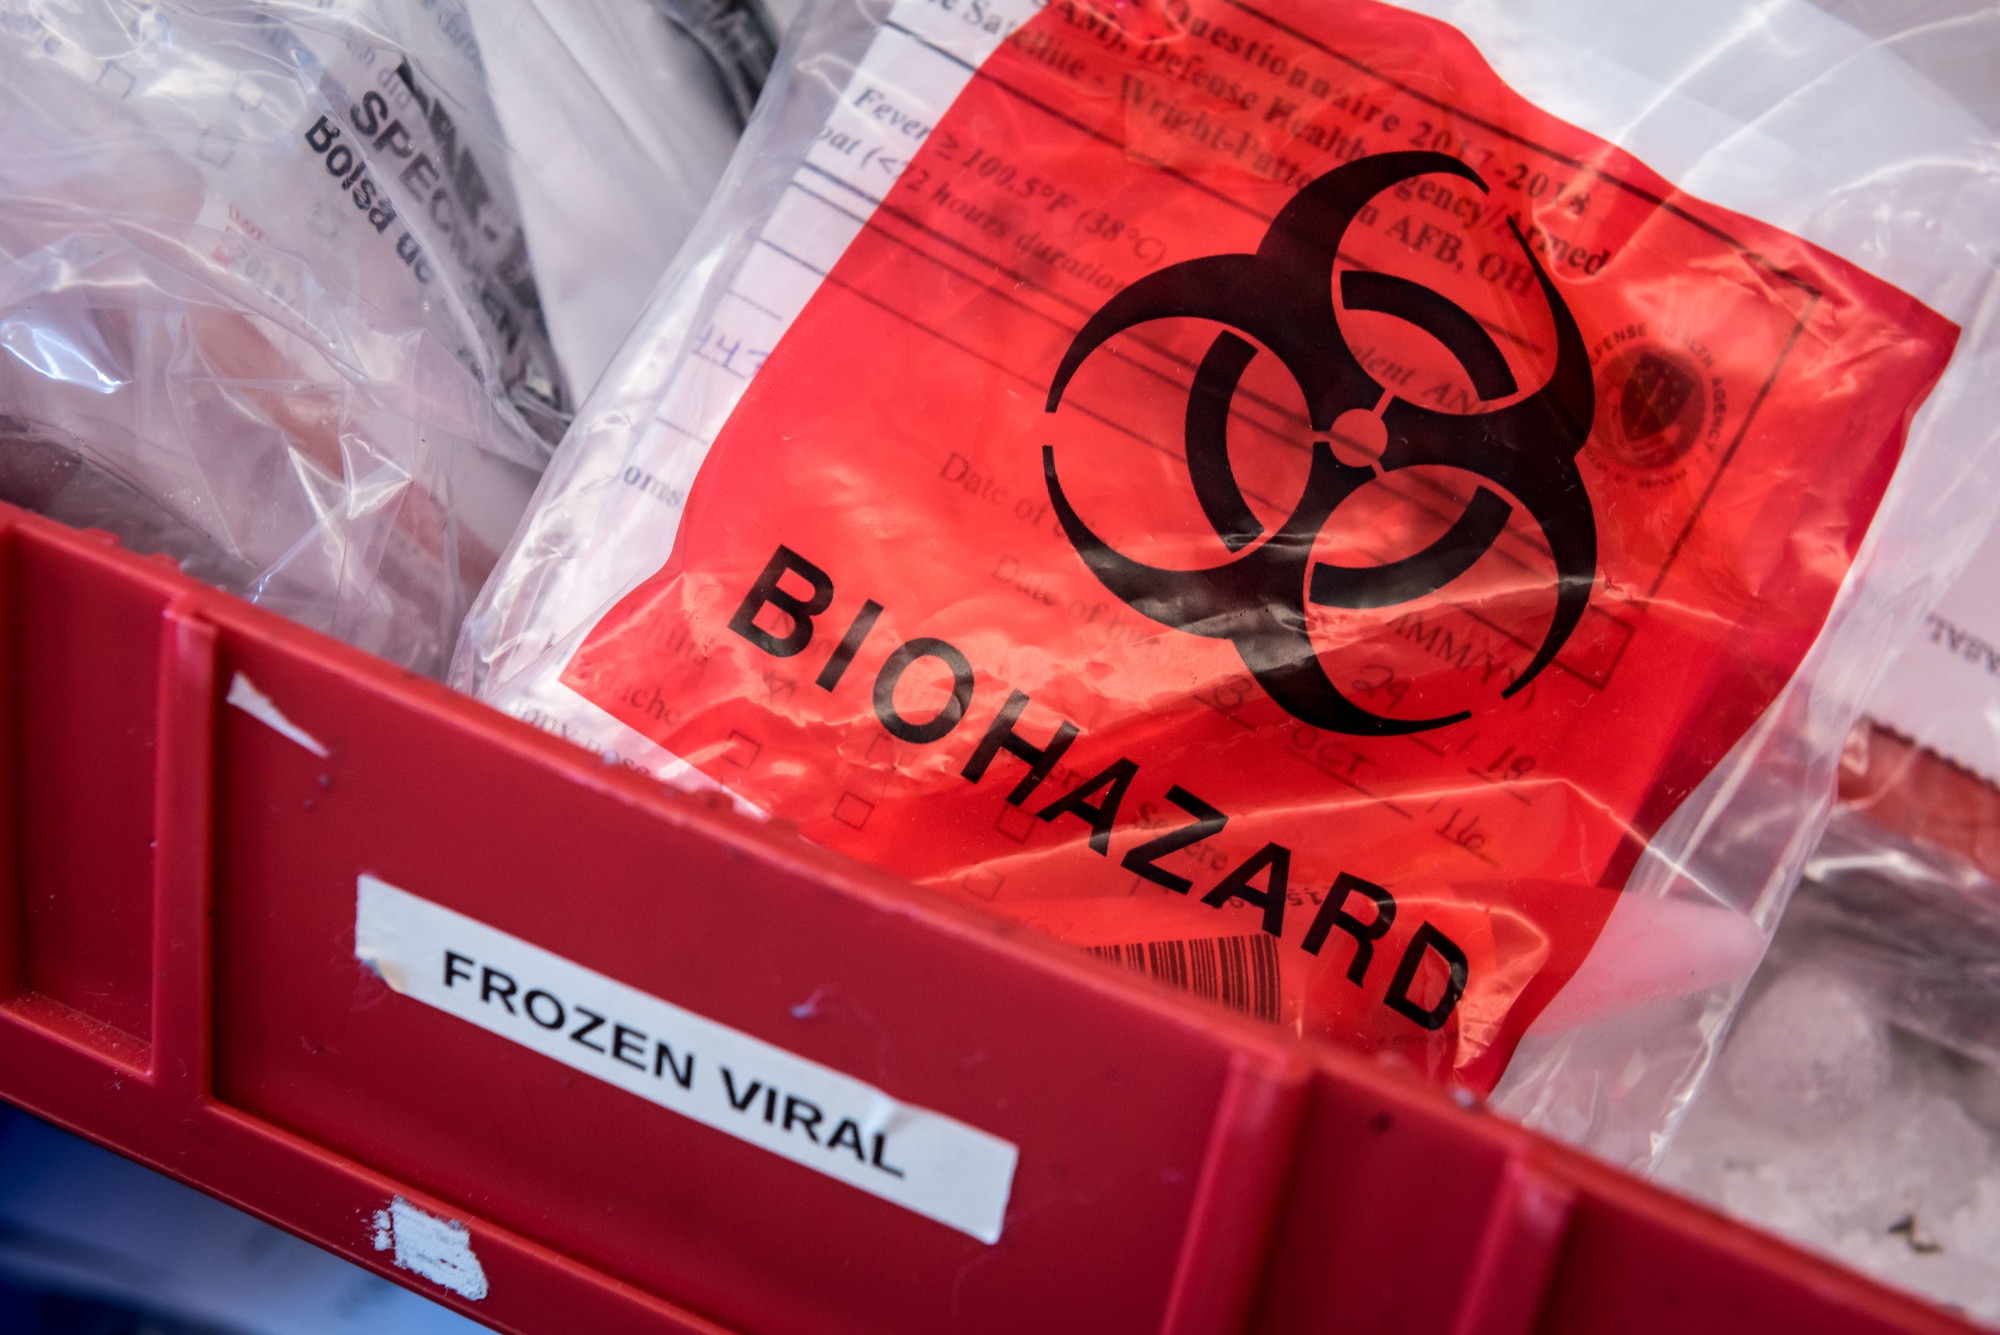 A biohazard logo marks a bag containing one of the 5,000 to 8,000 blood serum, fecal, urine, viral and respiratory samples that arrive six days a week from U.S. Air Force hospitals and clinics worldwide, as well as some other Department of Defense facilities, for analysis at the Epidemiology Laboratory Service, also known as the "Epi Lab" at the 711th Human Performance Wing’s United States Air Force School of Aerospace Medicine and Public Health at Wright Patterson AFB, Ohio.The lab is a Department of Defense reference laboratory offering clinical diagnostic, public health, and force health screening and testing. (U.S. Air Force photo by J.M. Eddins Jr.)